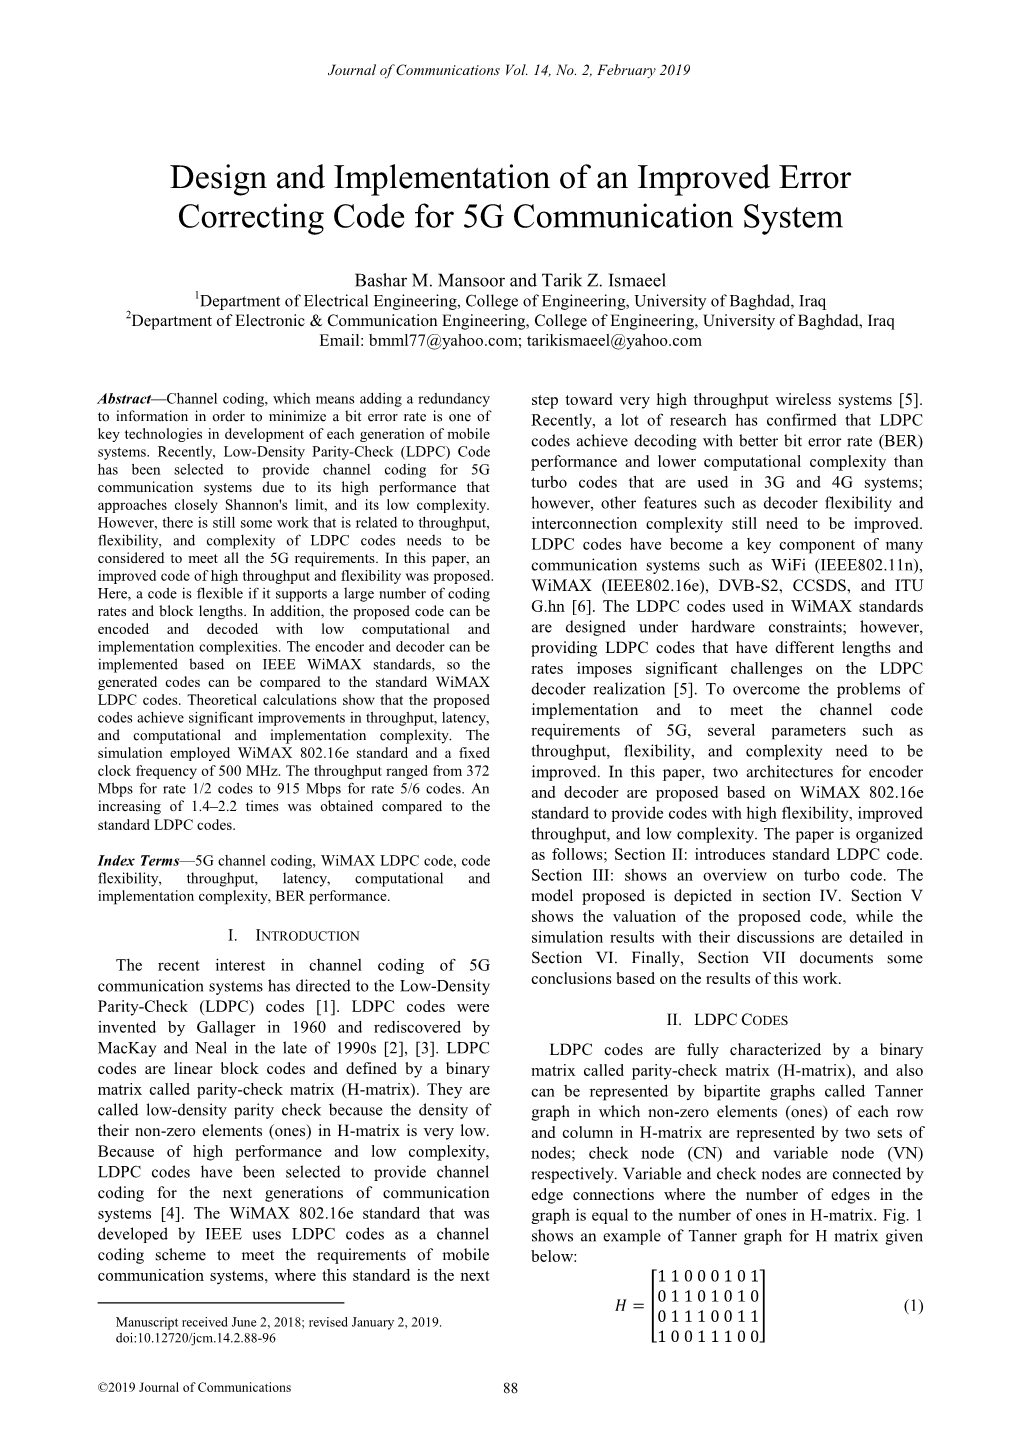 Design and Implementation of an Improved Error Correcting Code for 5G Communication System